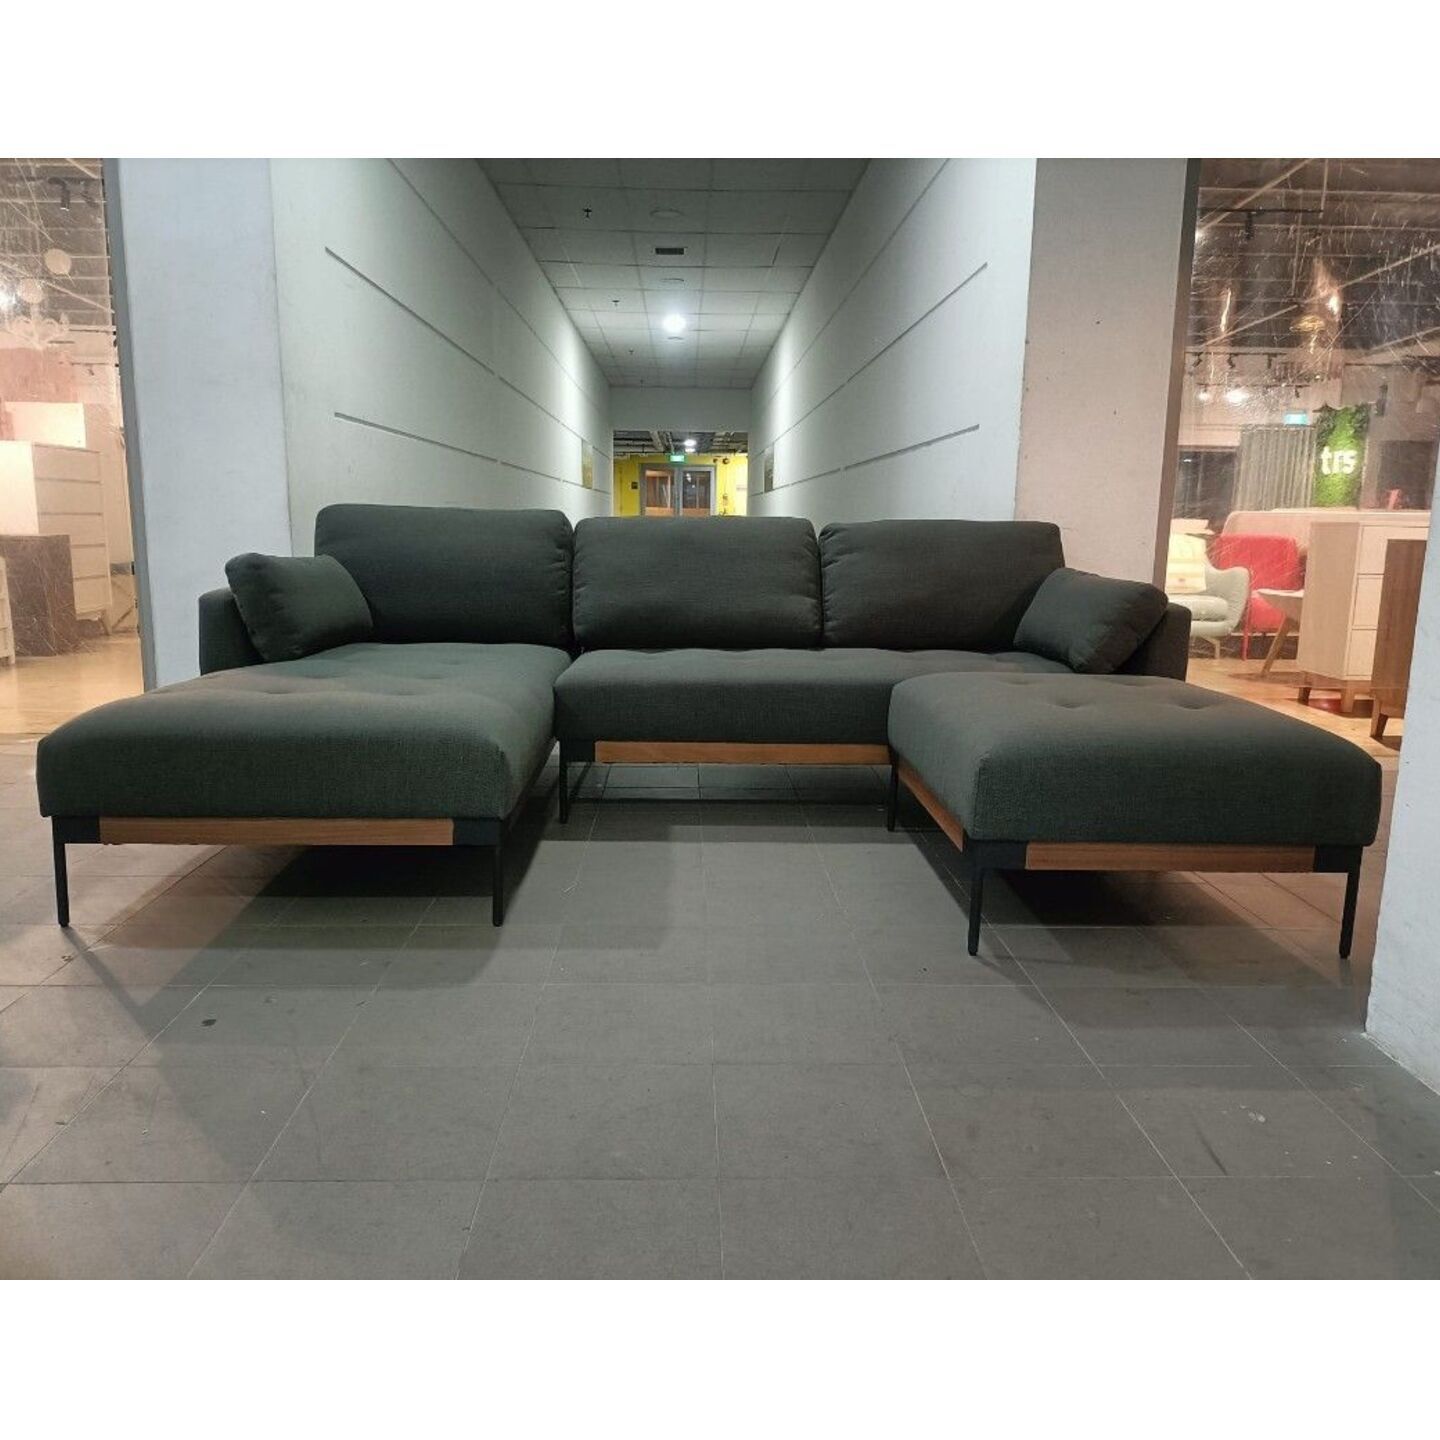 HAWKE Chaise Sectional L-Shaped Sofa with Ottoman in STONE GREY FABRIC